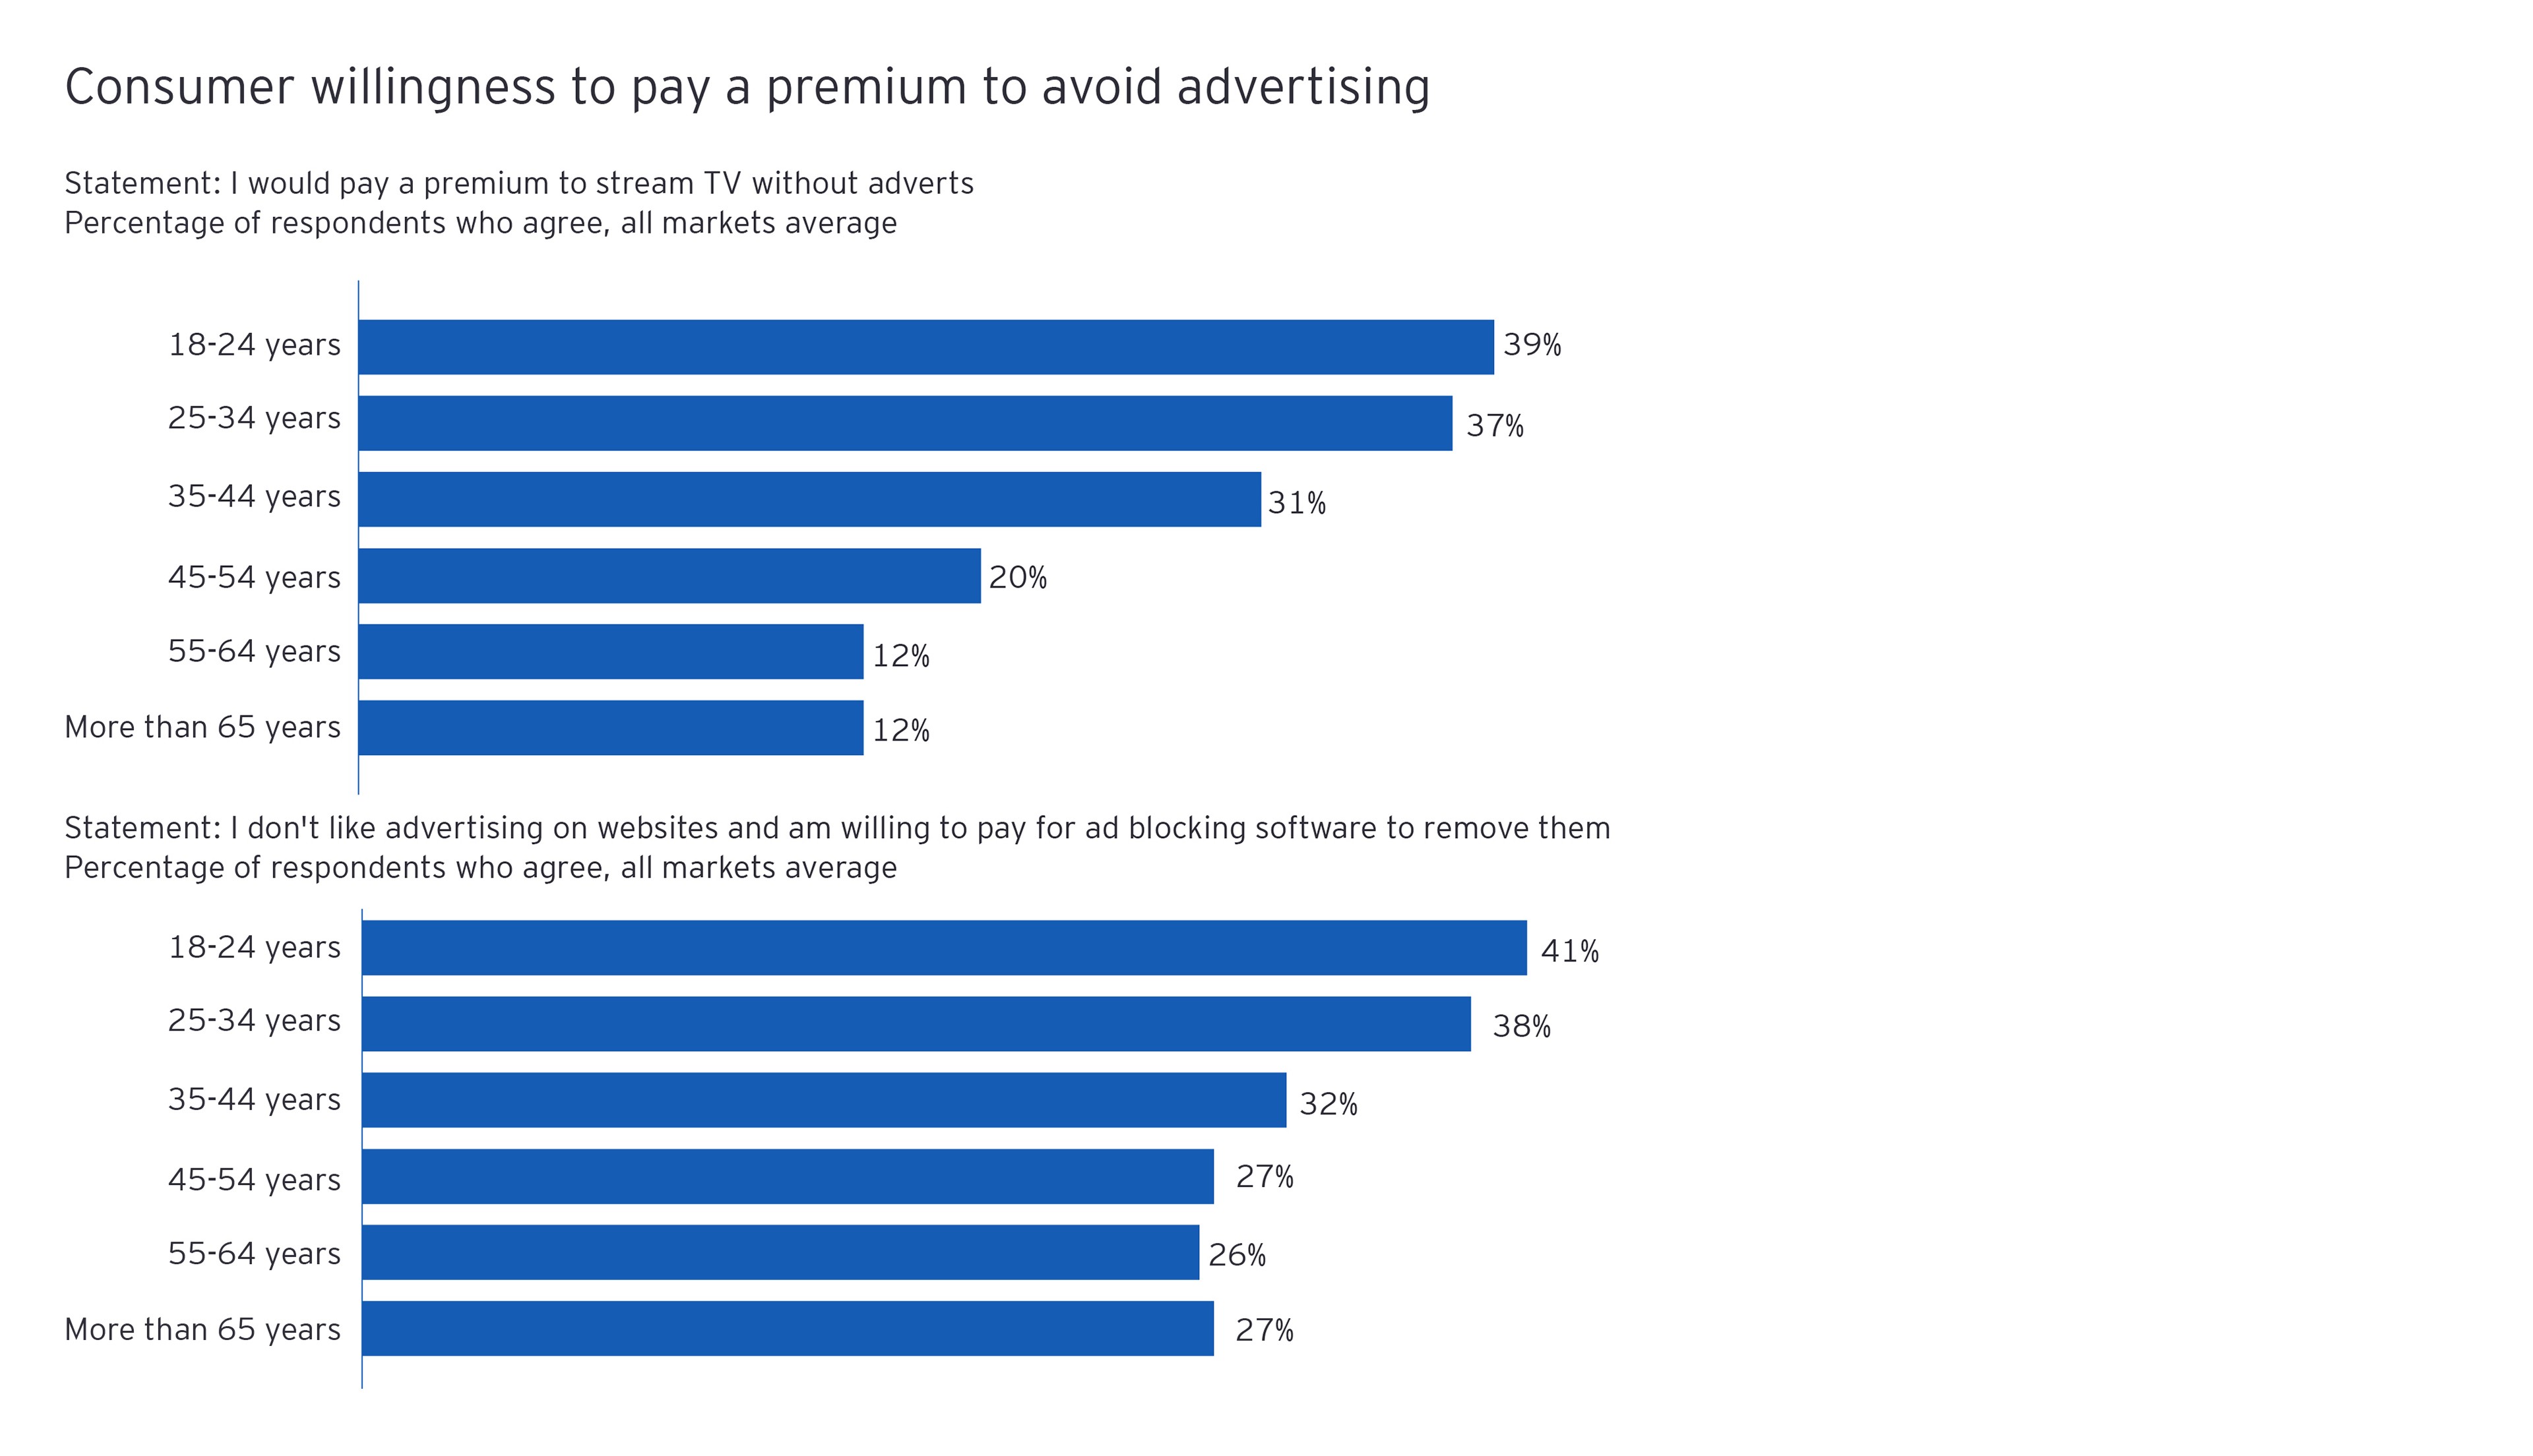 Consumer willingness to pay a premium to avoid advertising chart